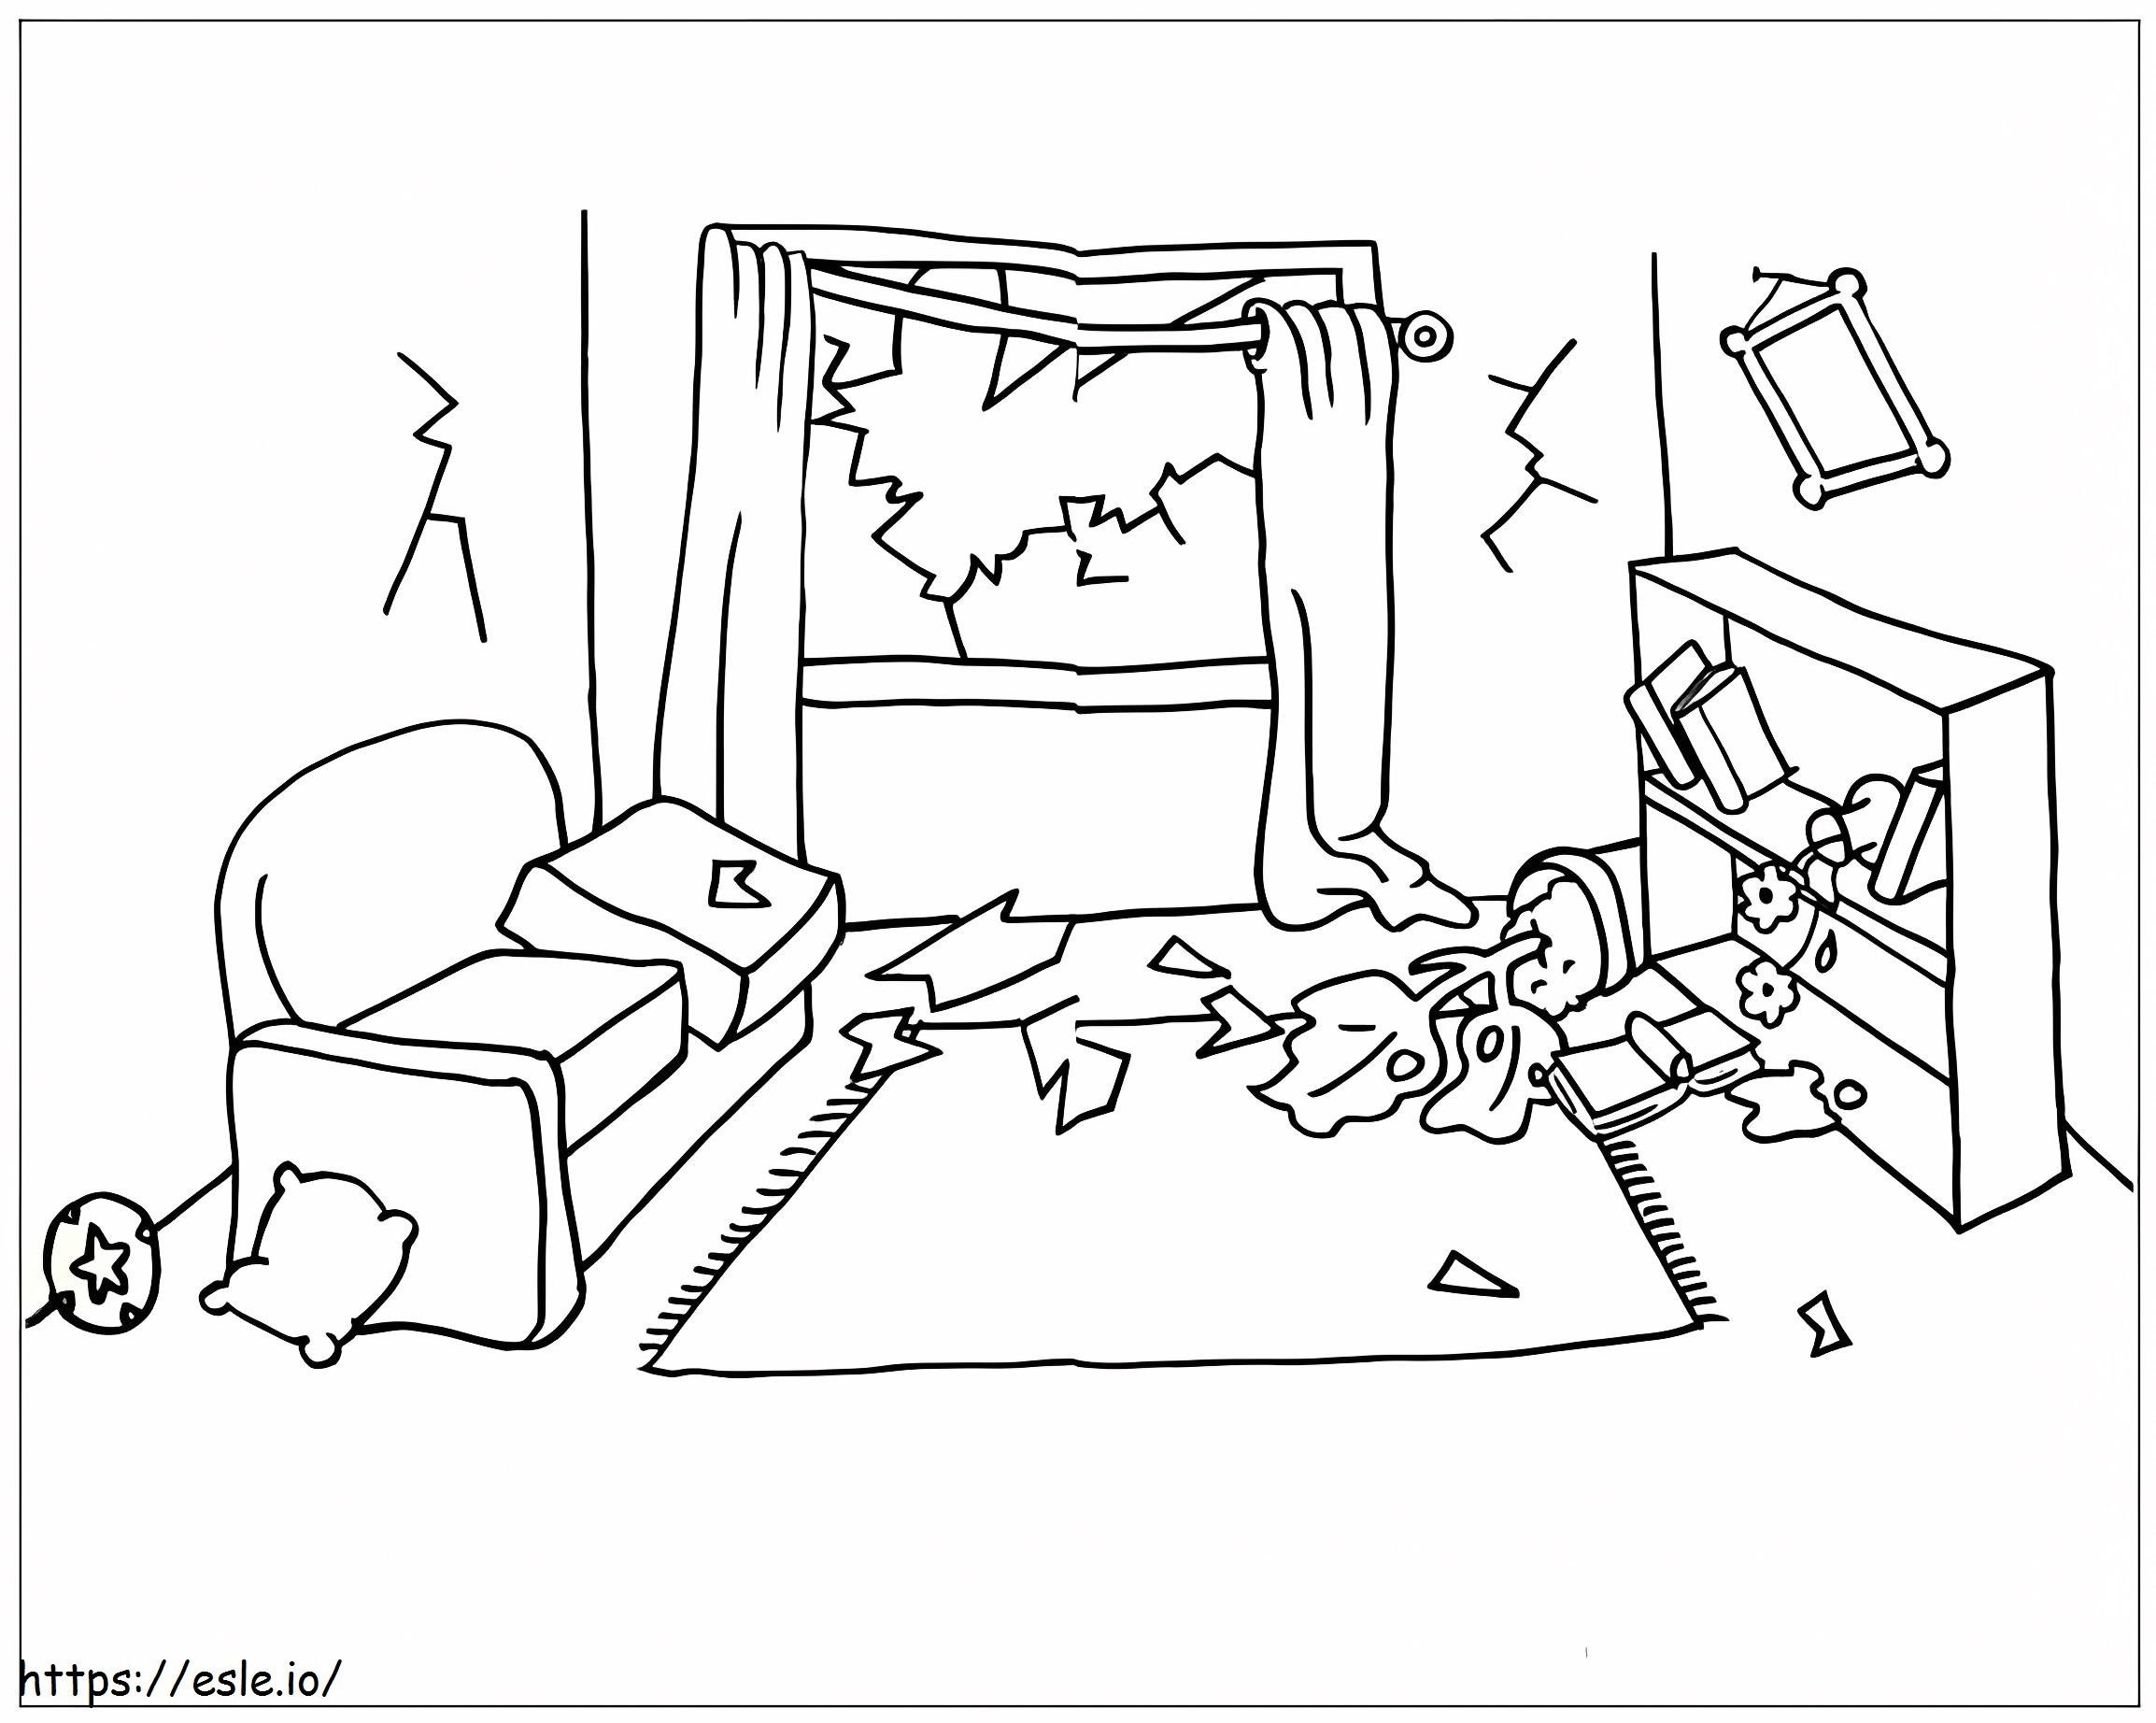 An Earthquake coloring page